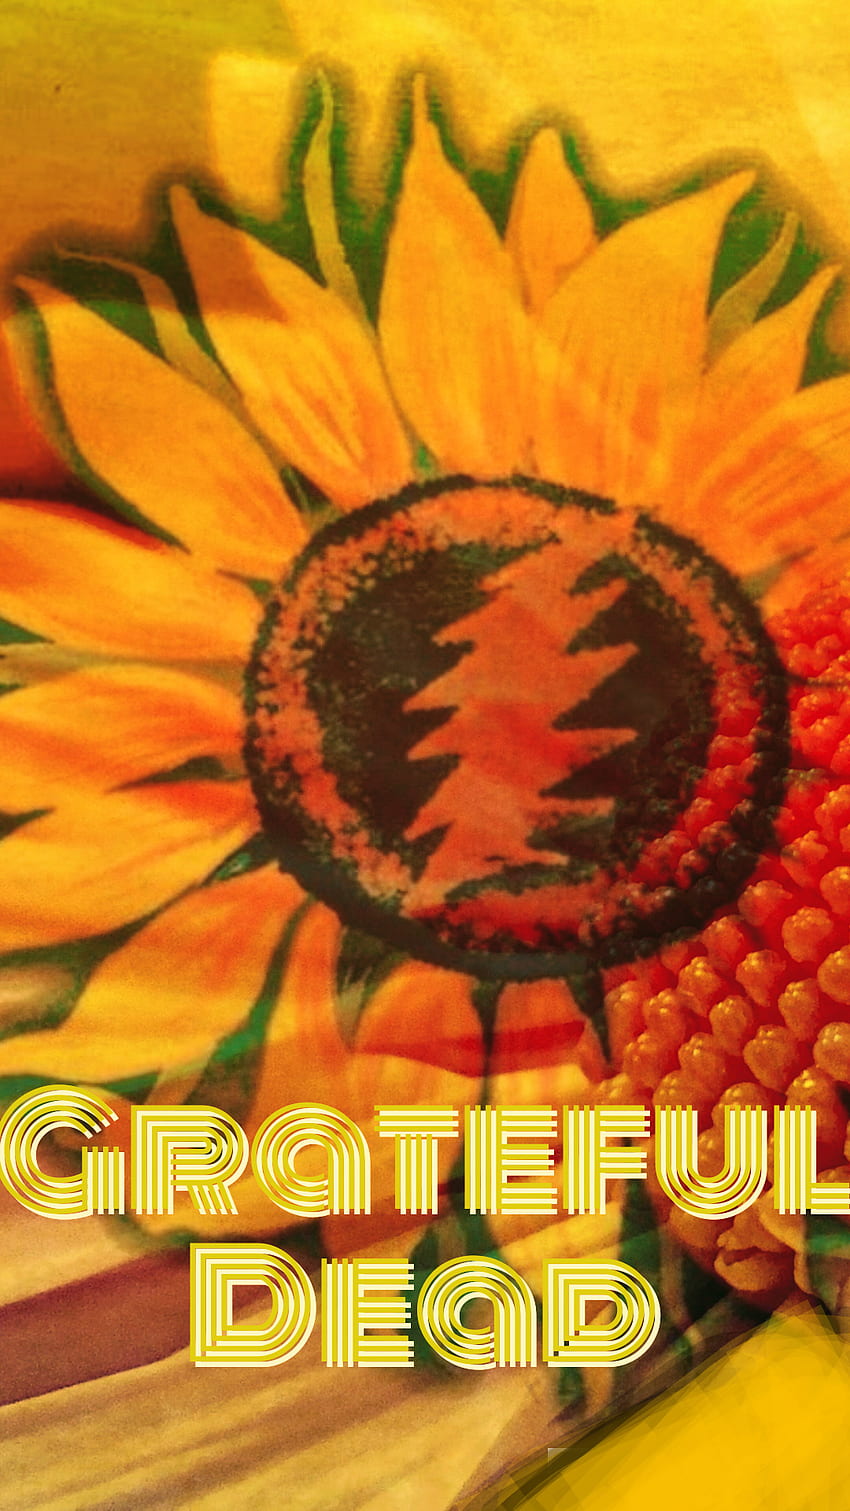 Grateful Dead, psychedelic, music HD phone wallpaper